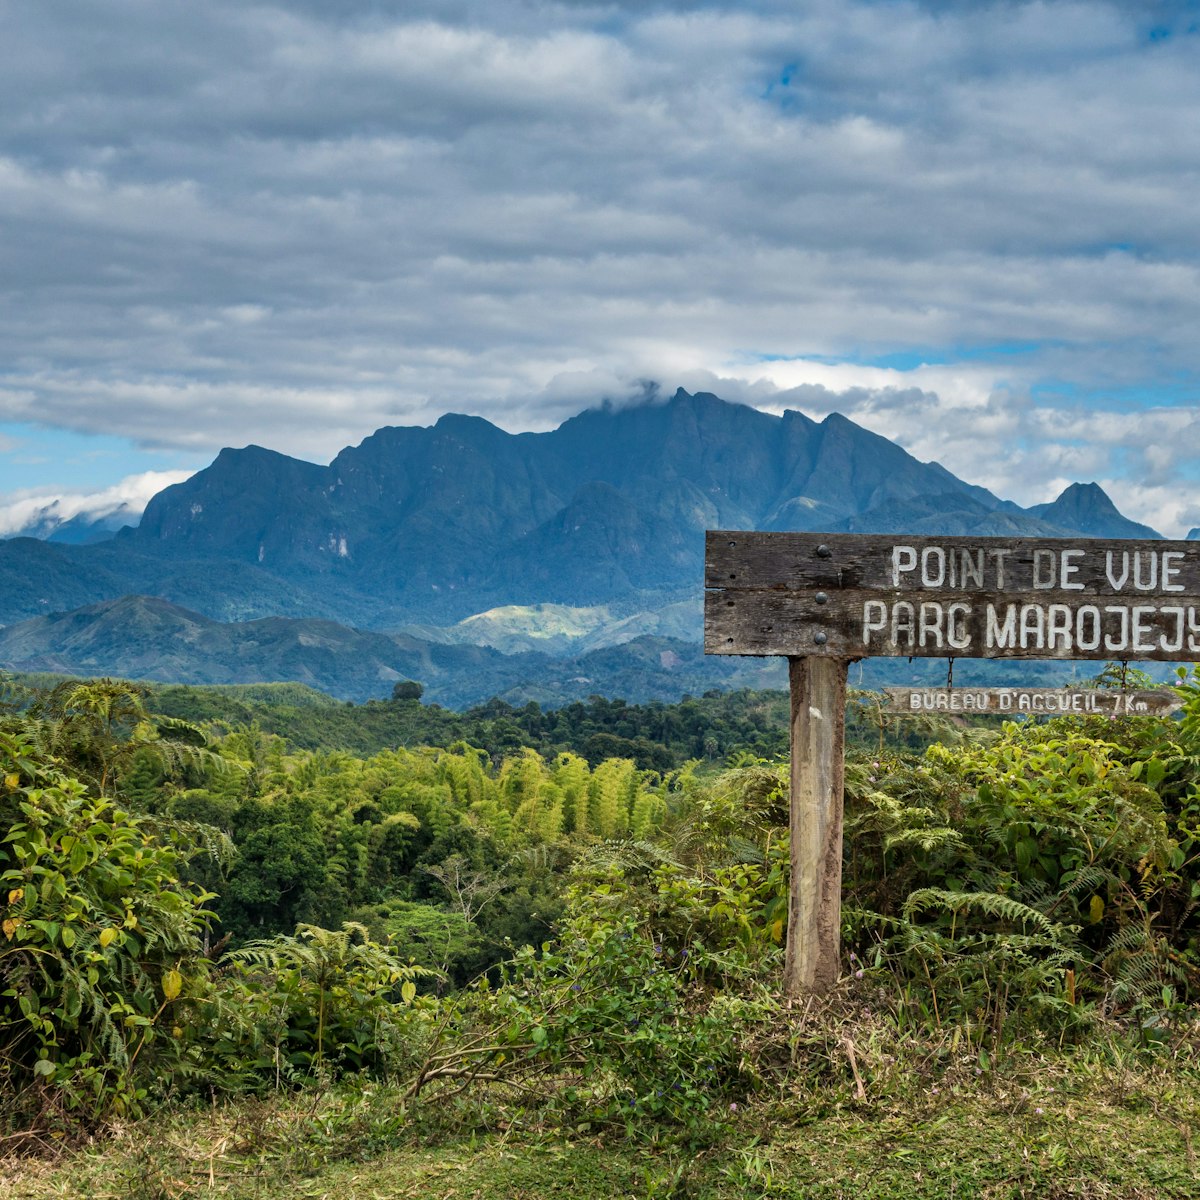 Sign for Marojejy National Park with clouds over mountains.
813983598
Park, Rainforest, Trail, Cliff, Mountain Range, Hill, Marojejy, Sky, Madagascar, Landscape - Scenery, Tree, Forest, Sight, Cloud - Sky, Africa, Summit - Meeting, Natural Parkland, Green Color, Nature, Mountain, Outdoors, Peak, Rock - Object, No People, Horizontal, Photography, Natural, Mountain Peak, Jungle, Grass, Rock, Green, Top, Footpath